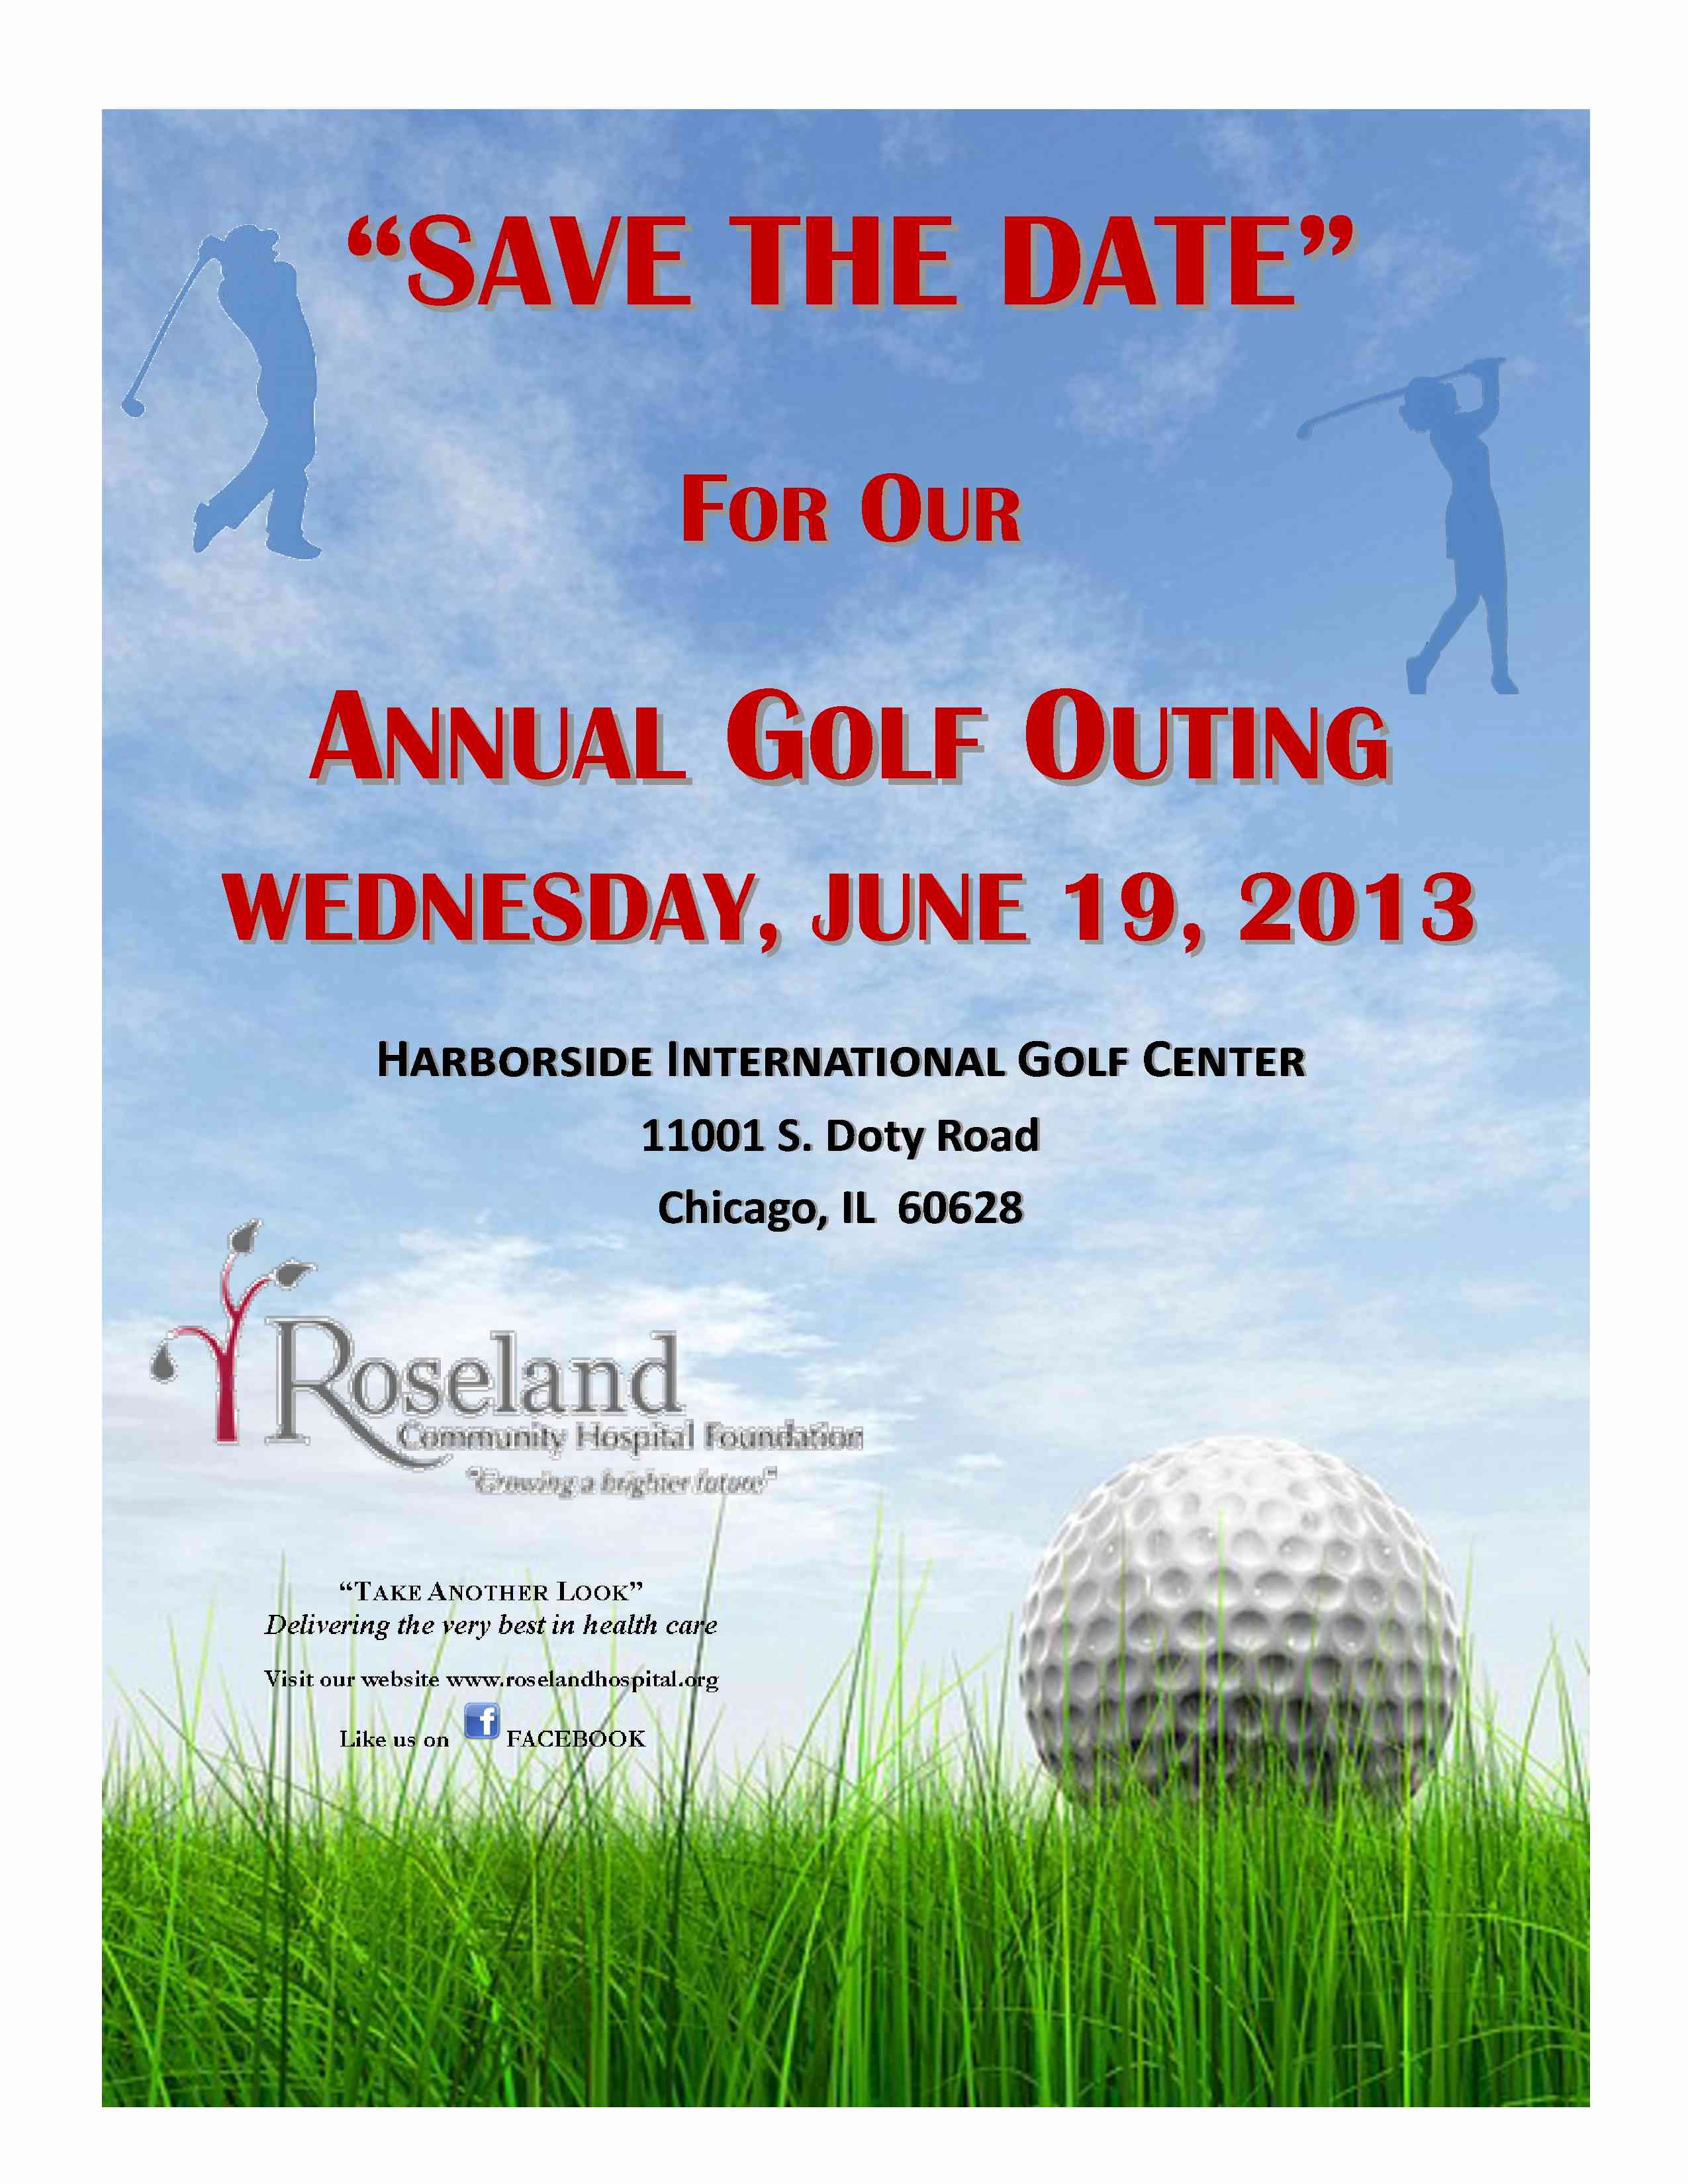 Free Golf Outing Flyer Template New Hospital Volunteer